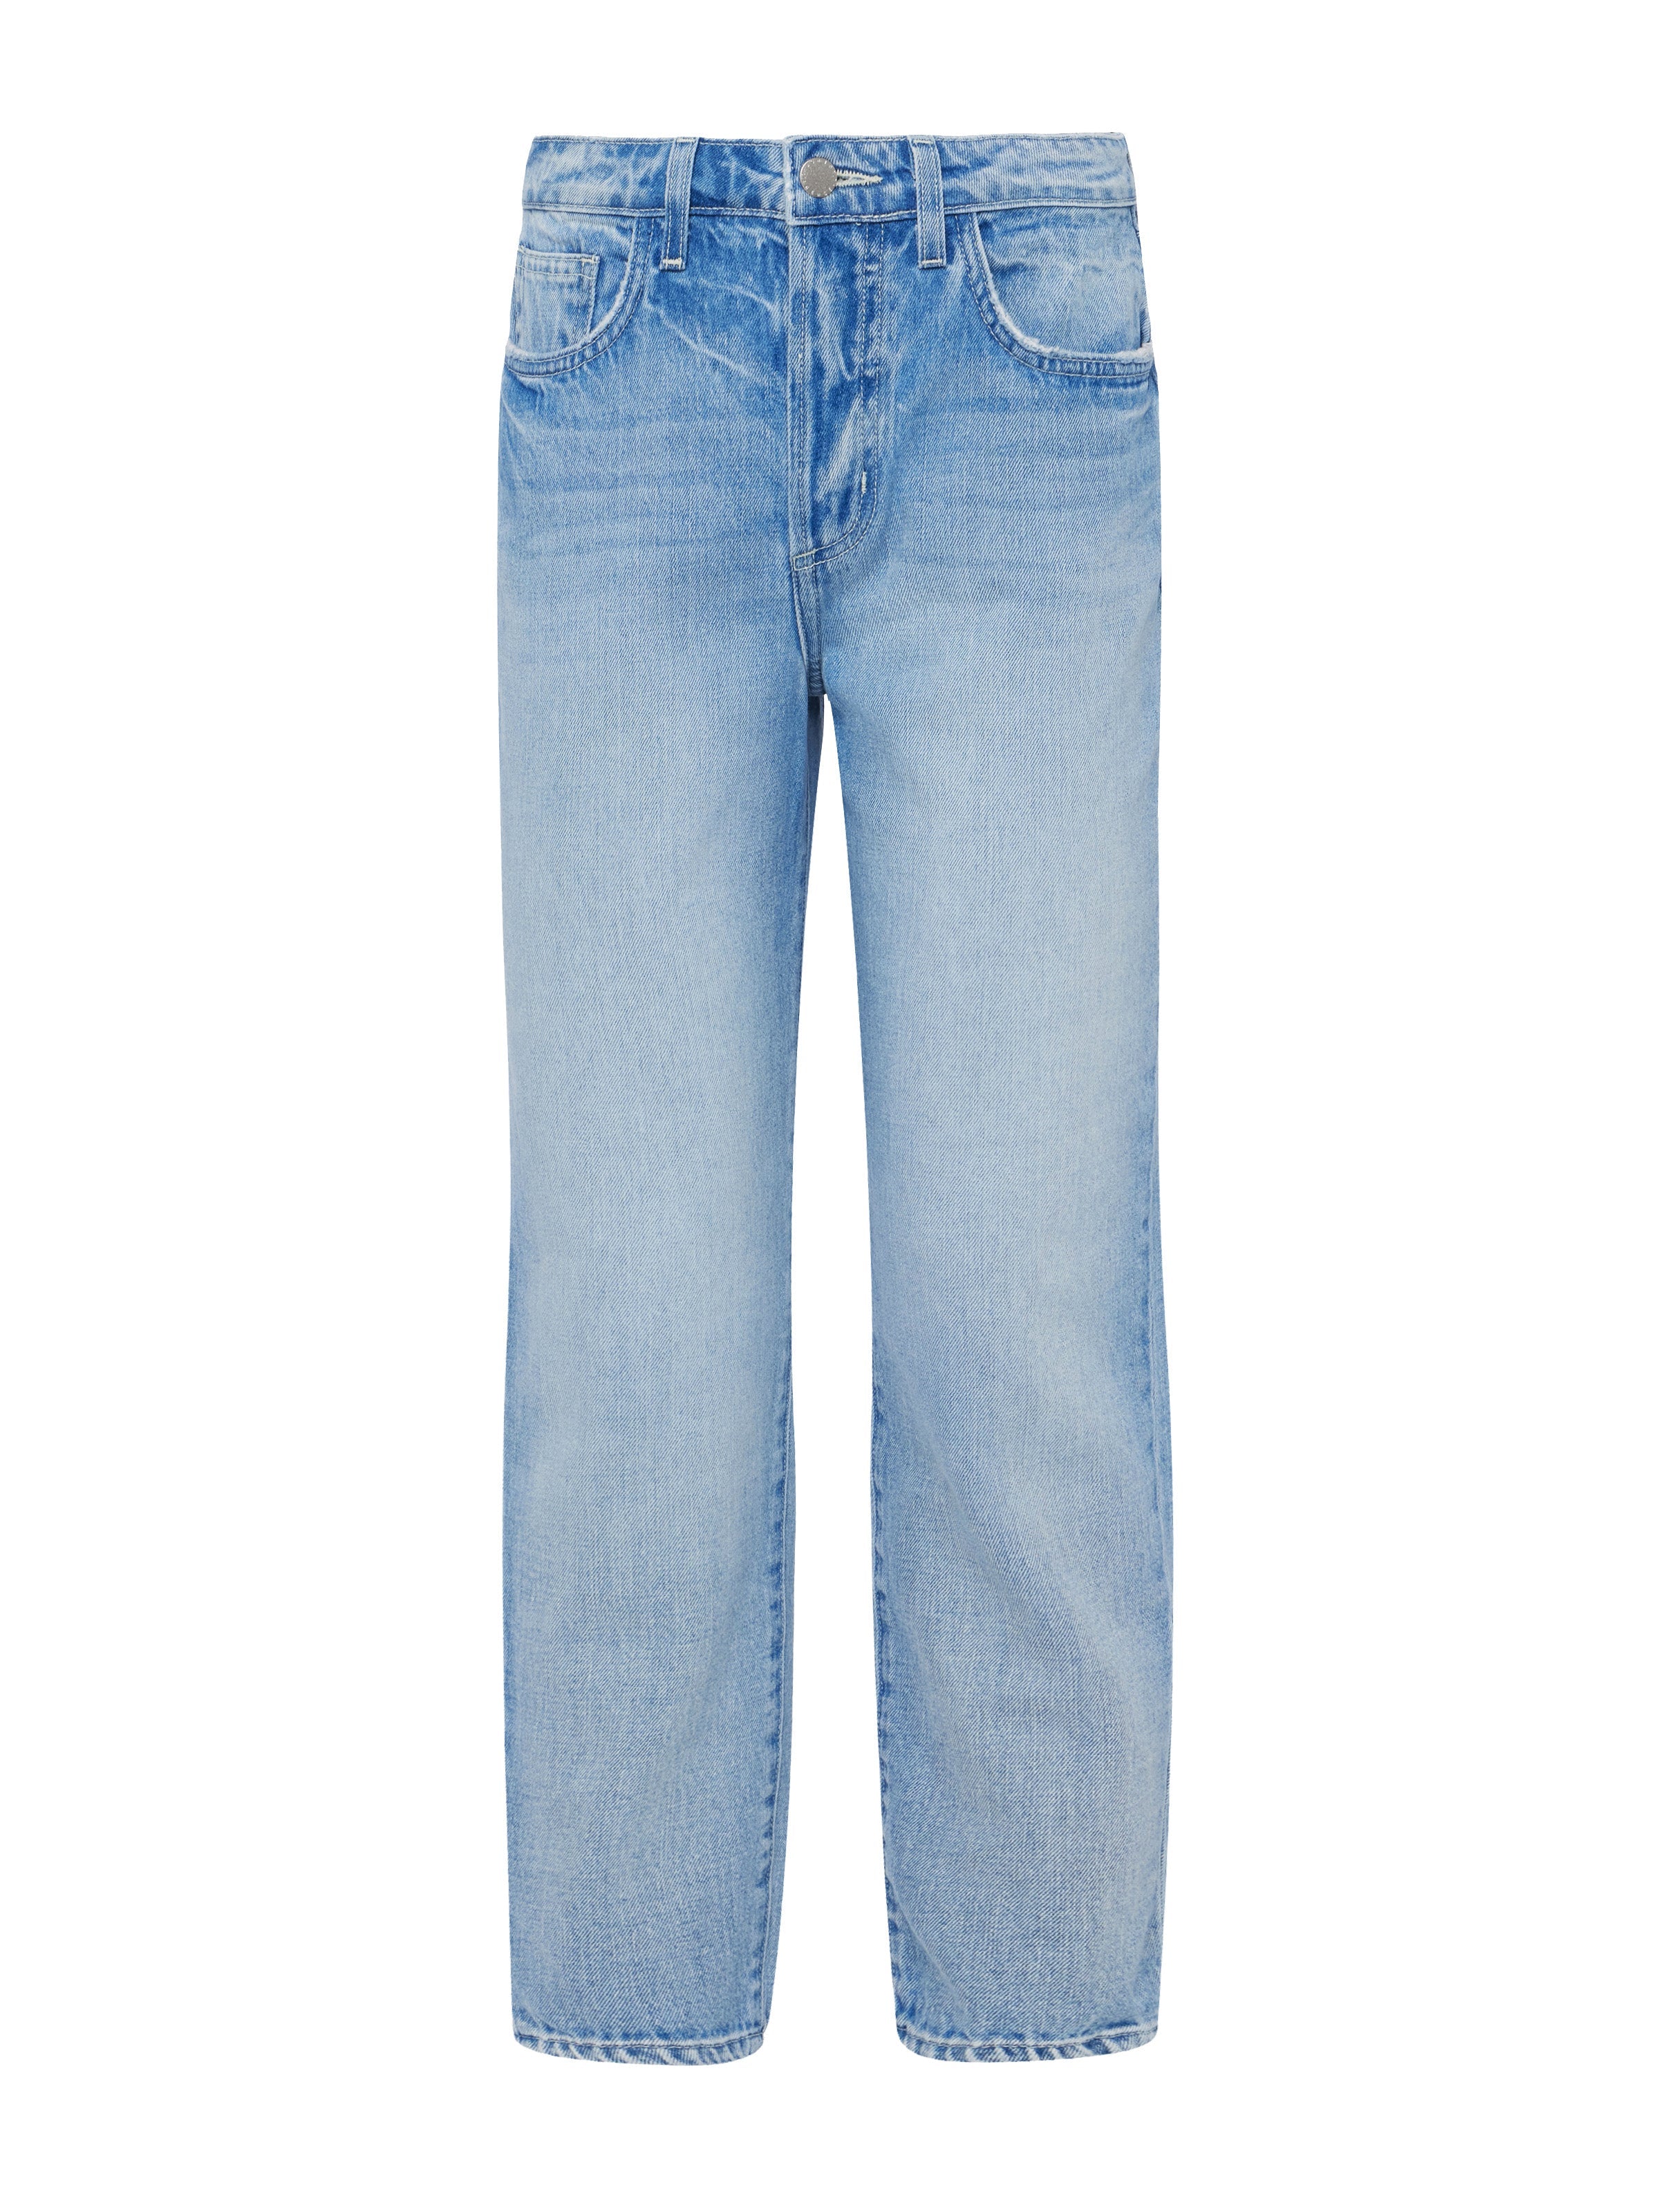 June Cropped Stovepipe Jean in Palisade